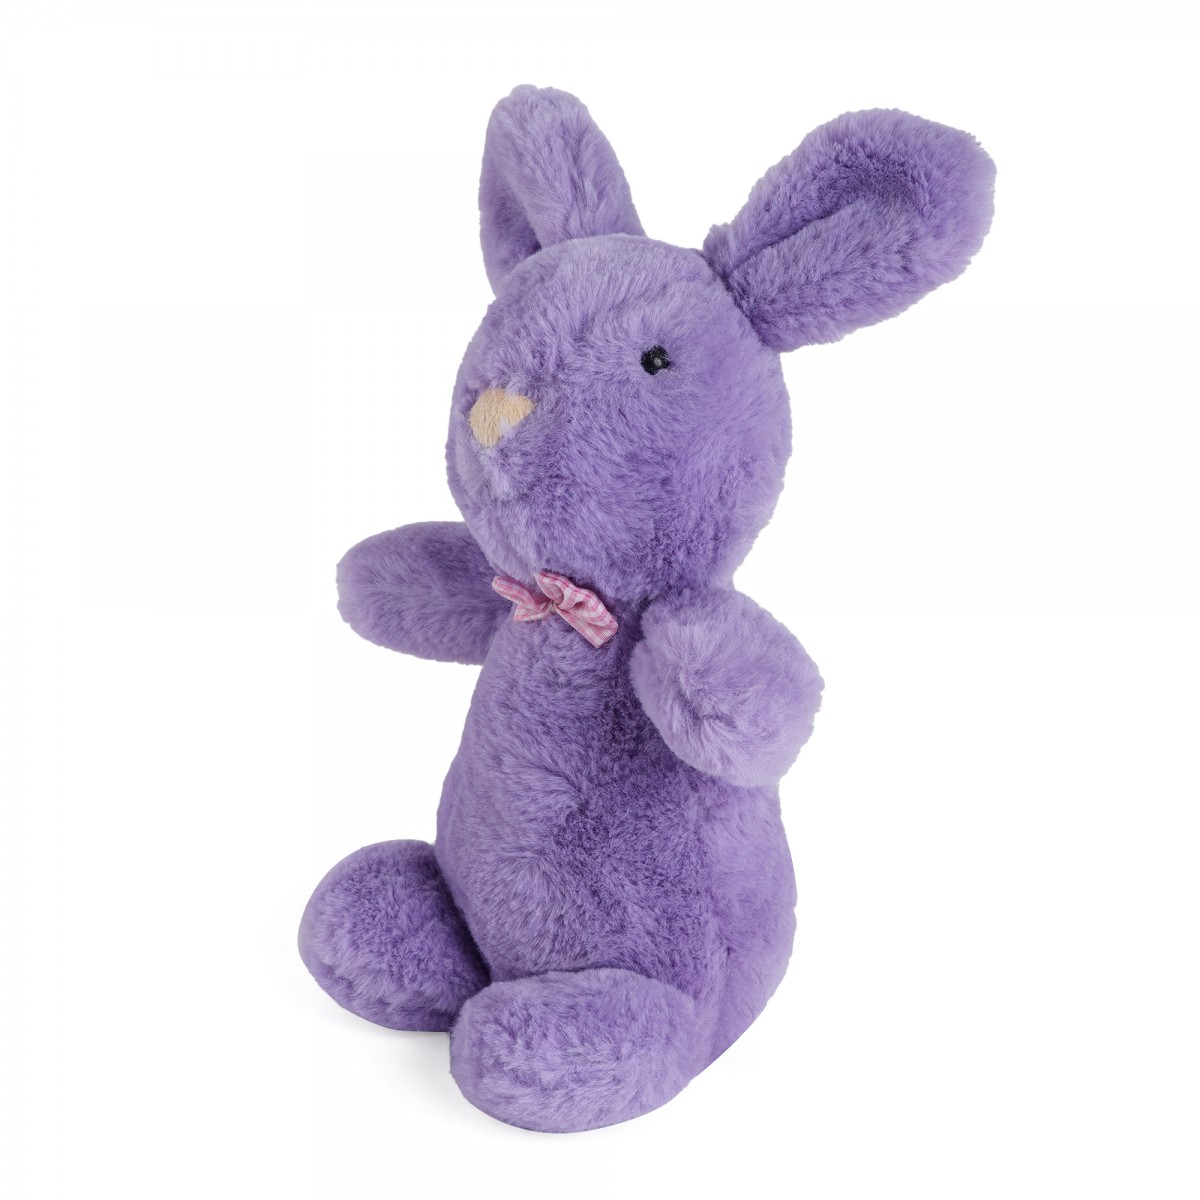 Huggable Cuddly Small Bunny Stuffed Toy By Fuzzbuzz, Soft Toys for Kids, Cute Plushies Purple, For Kids Of Age 2 Years & Above